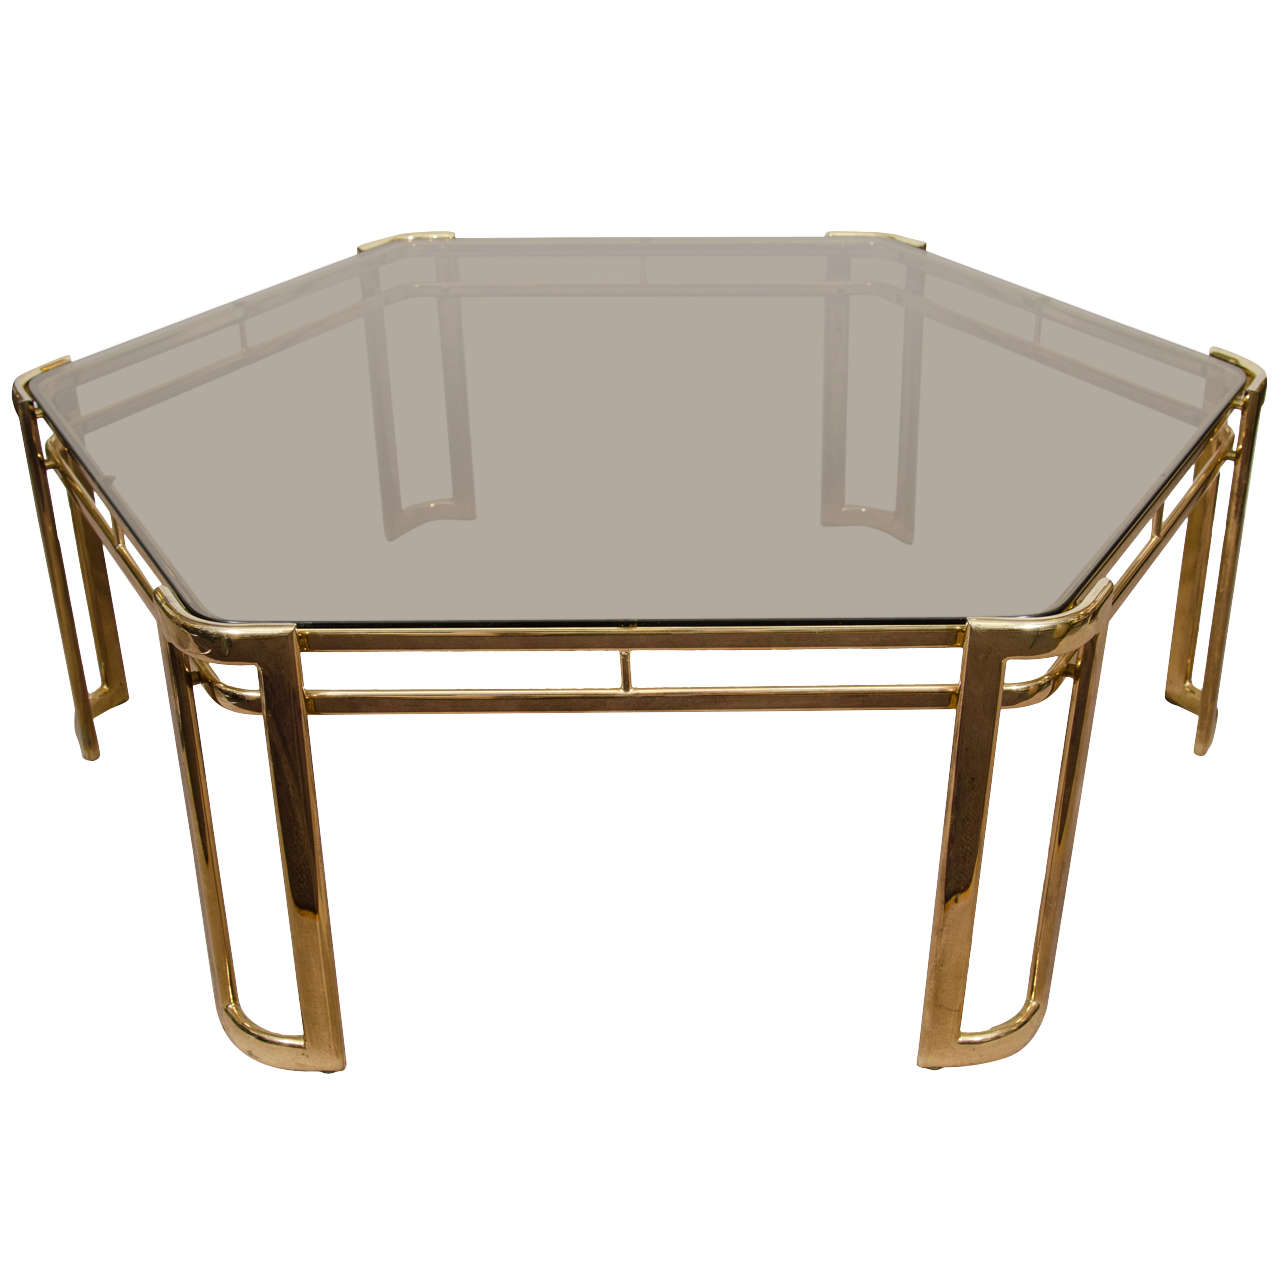 Midcentury Brass-Plated Hexagonal Coffee or Cocktail Table